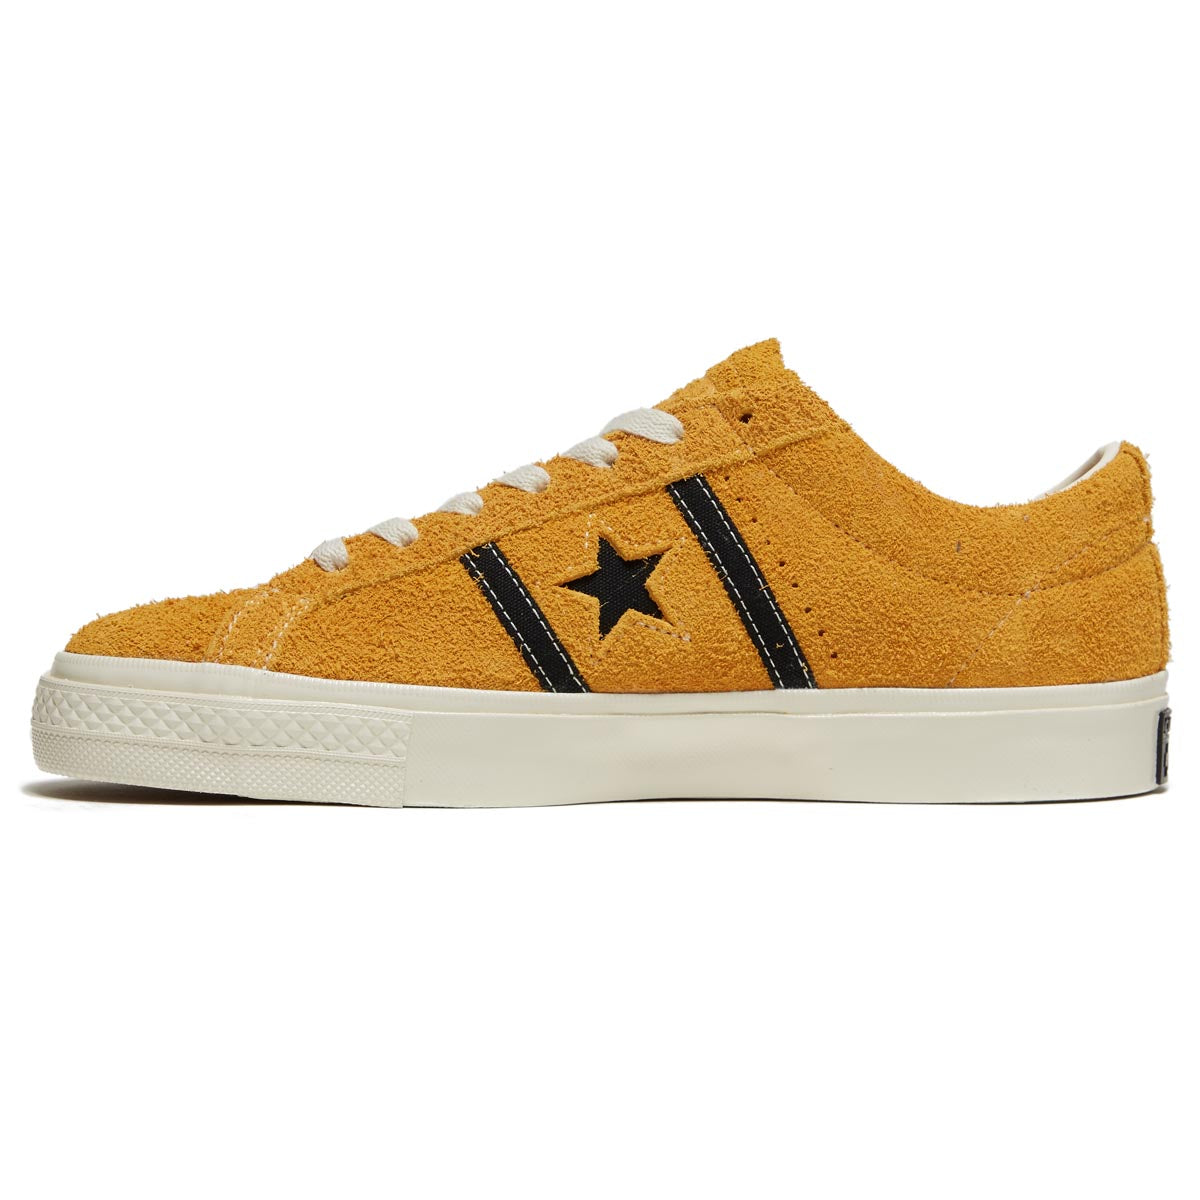 Converse One Star Academy Pro Suede Ox Shoes - Sunflower Gold/Black/Egret image 2